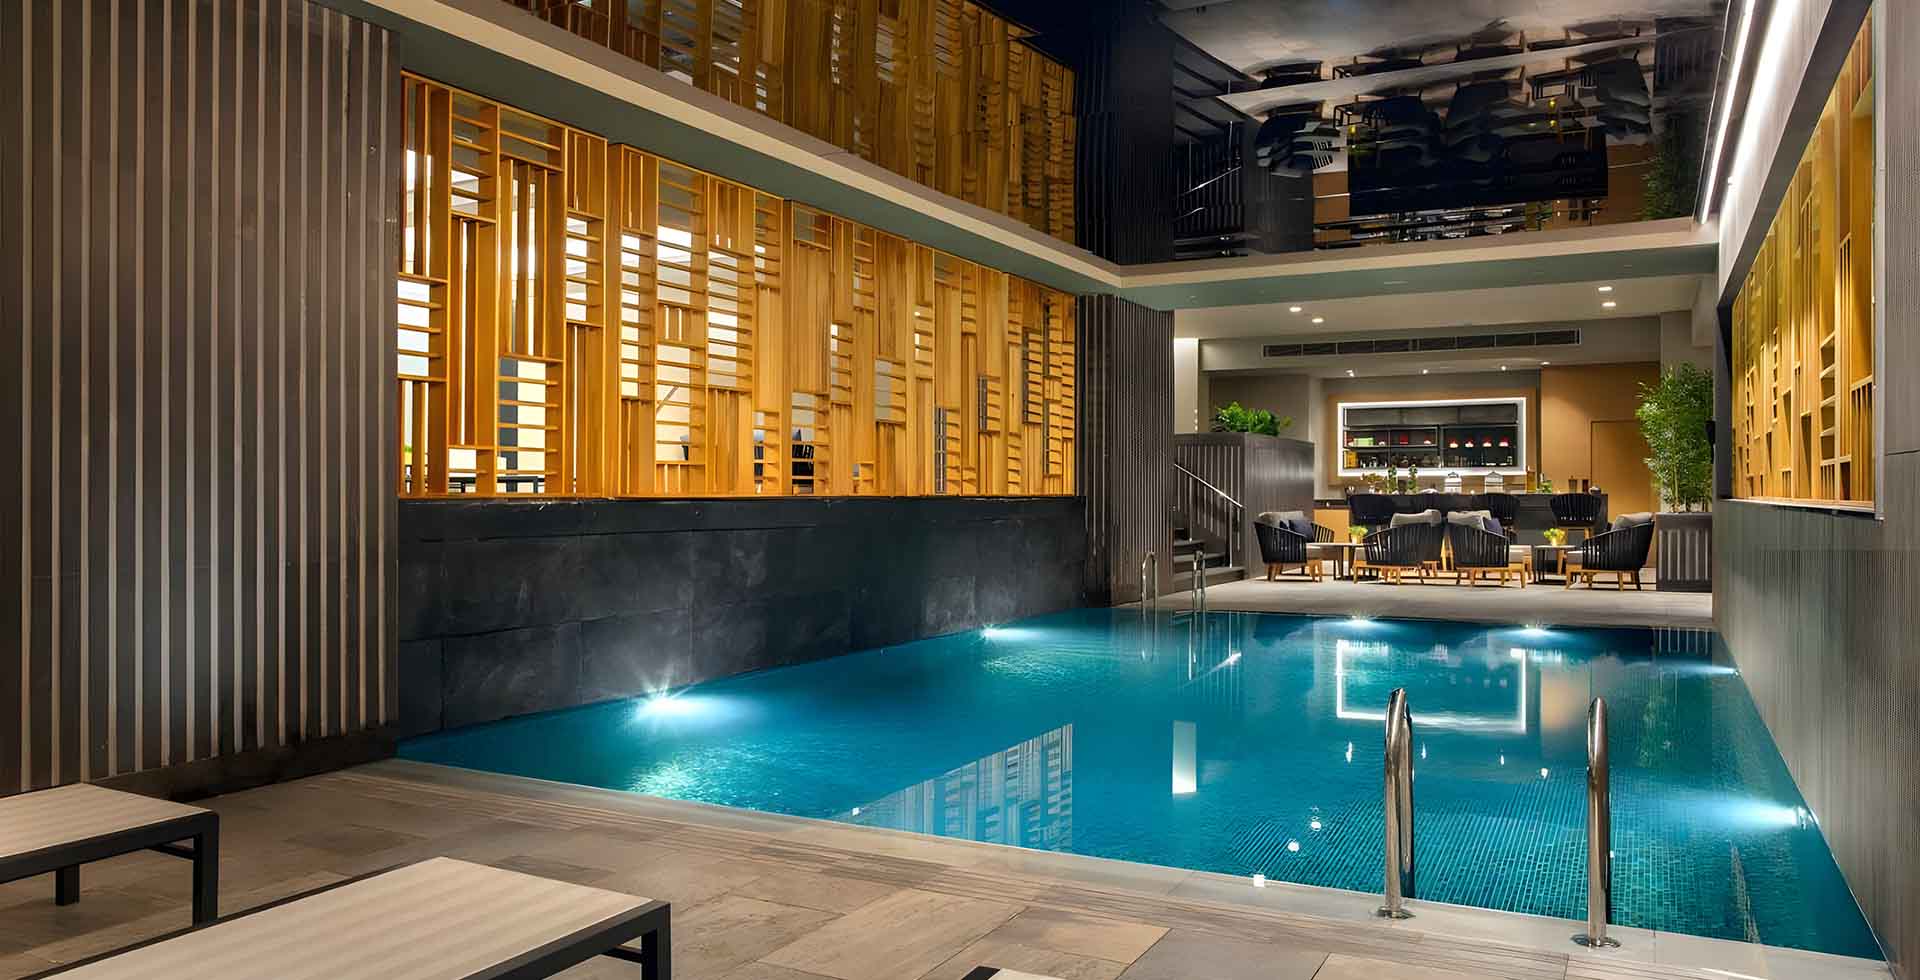 Tranquil Escape at Hilton Amsterdam's Indoor Pool